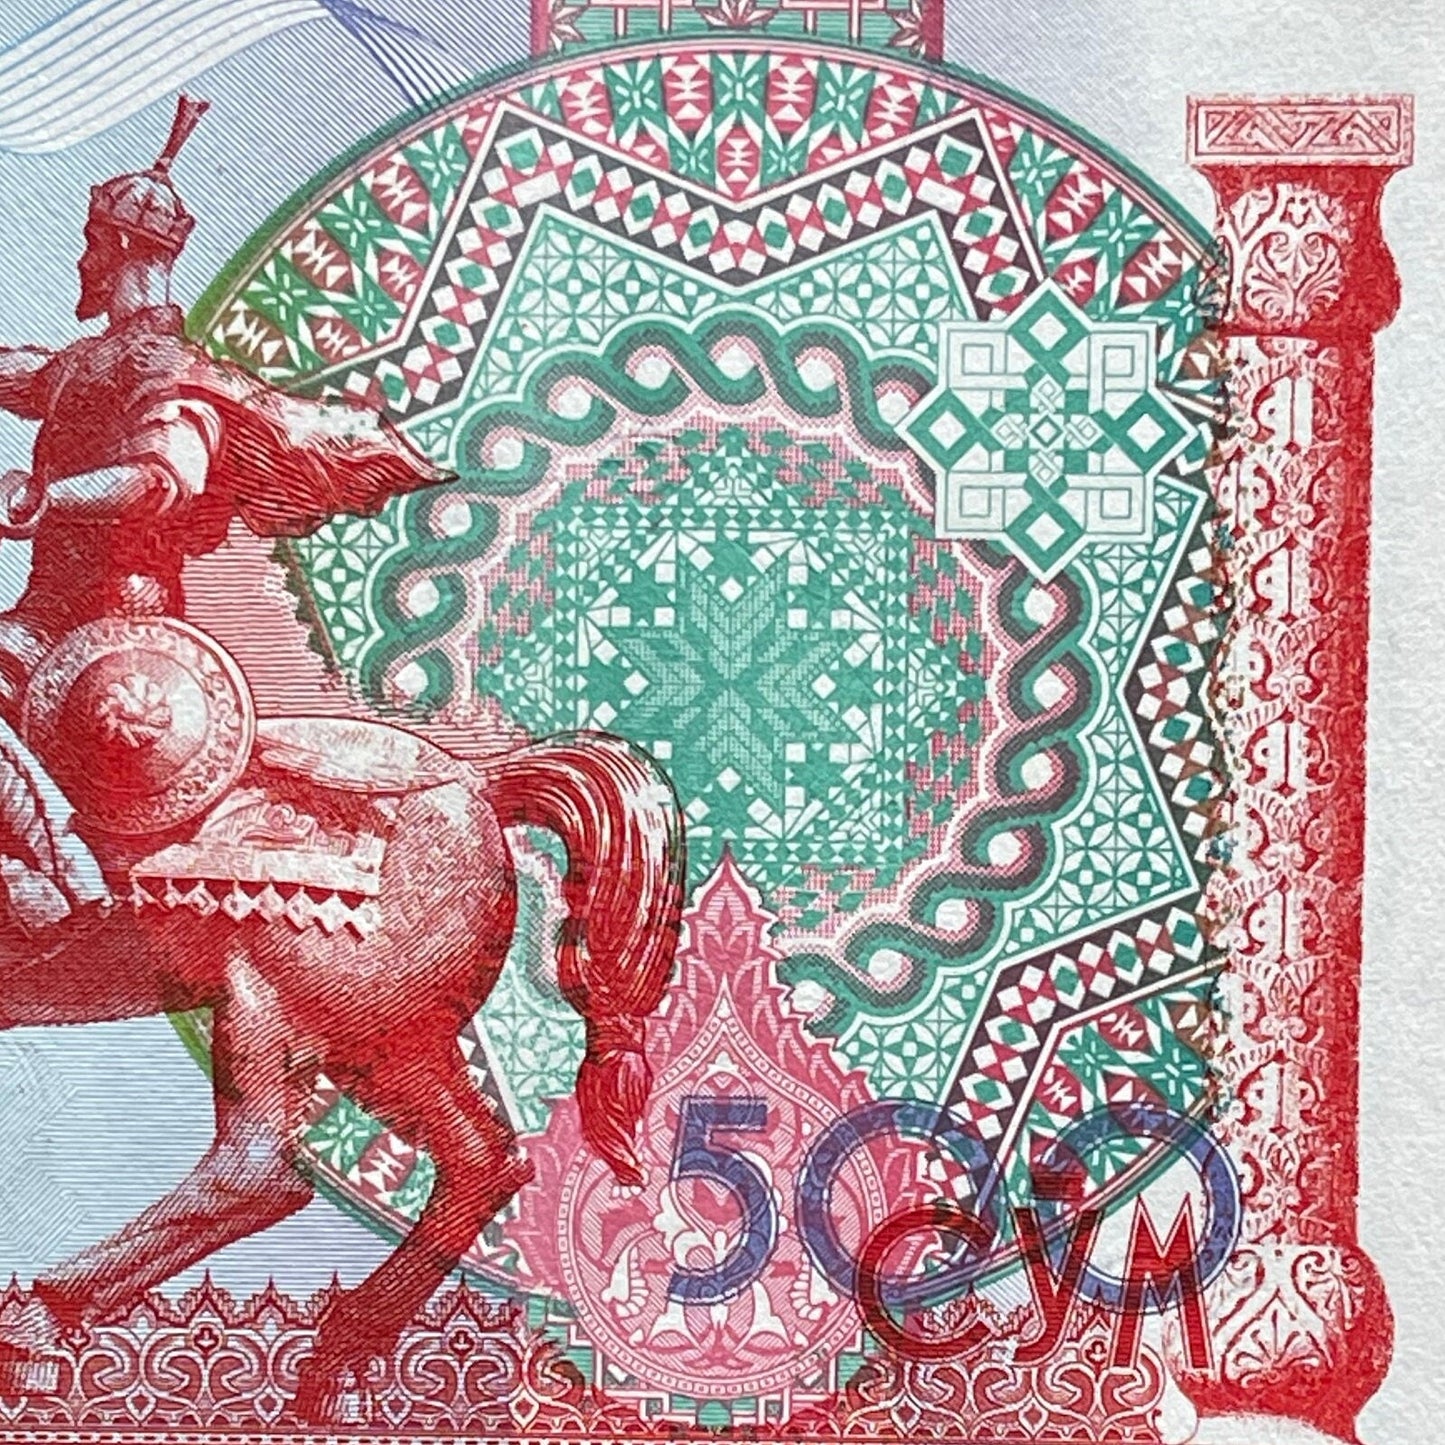 Tamerlane on Horseback 500 S'om Uzbekistan Authentic Banknote Money for Jewelry and Collage (1999) (Ghazi) (Equestrian Statue) (Amir Timur)